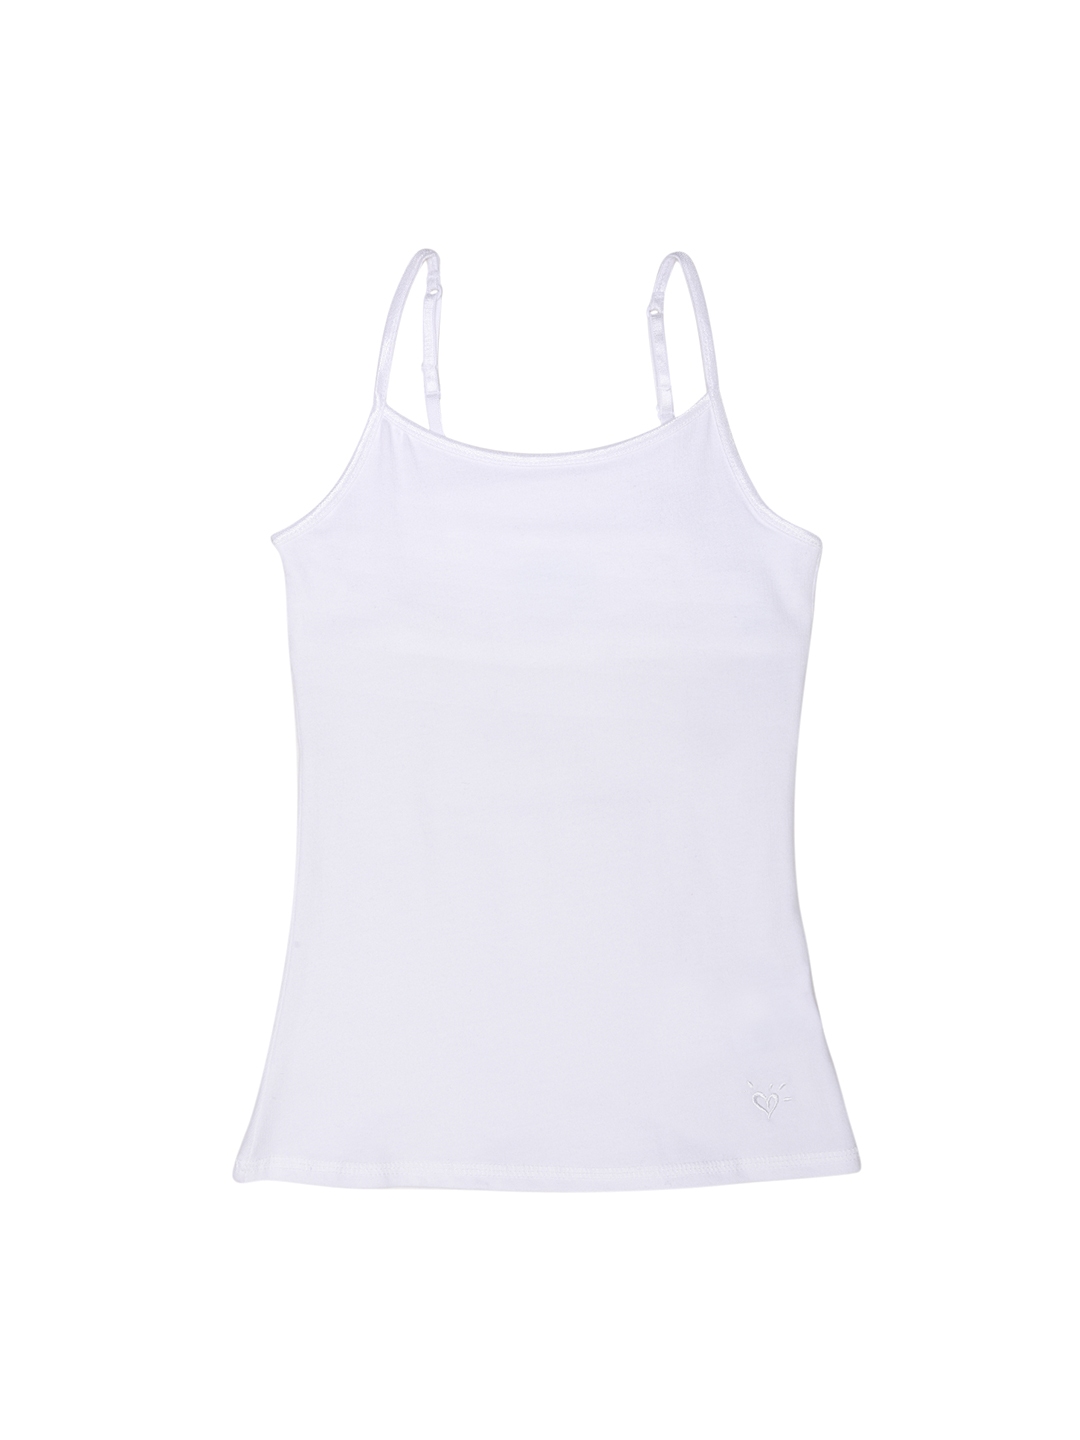 Buy JUSTICE Girls White Camisole - Camisoles for Girls 1683918 | Myntra